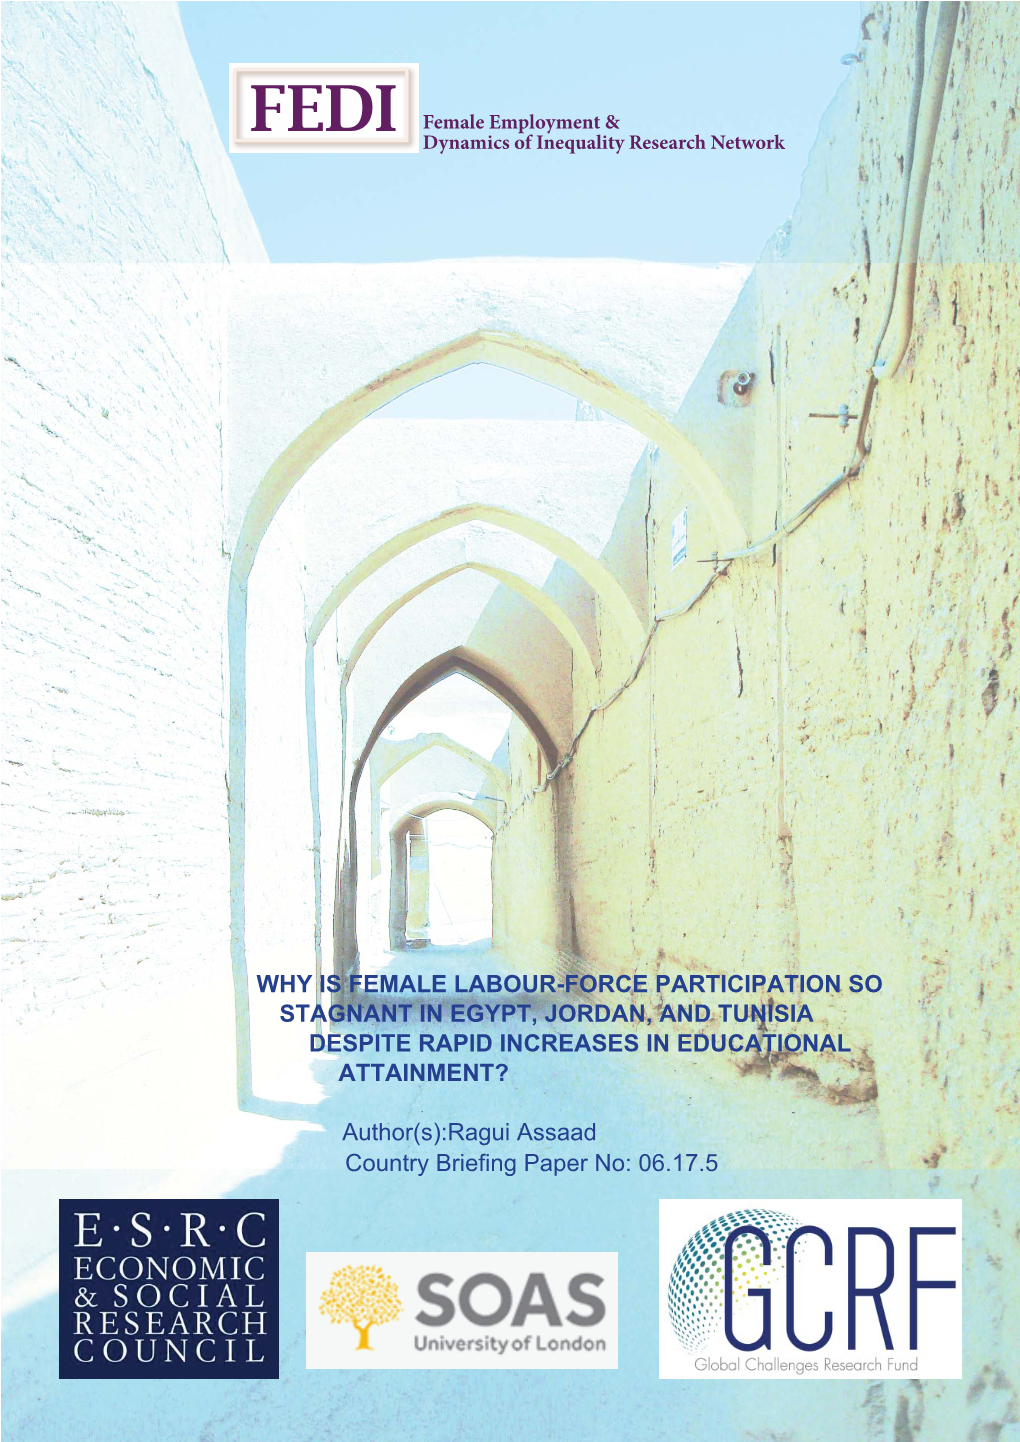 Why Is Female Labour-Force Participation So Stagnant in Egypt, Jordan, and Tunisia Despite Rapid Increases in Educational Attainment?